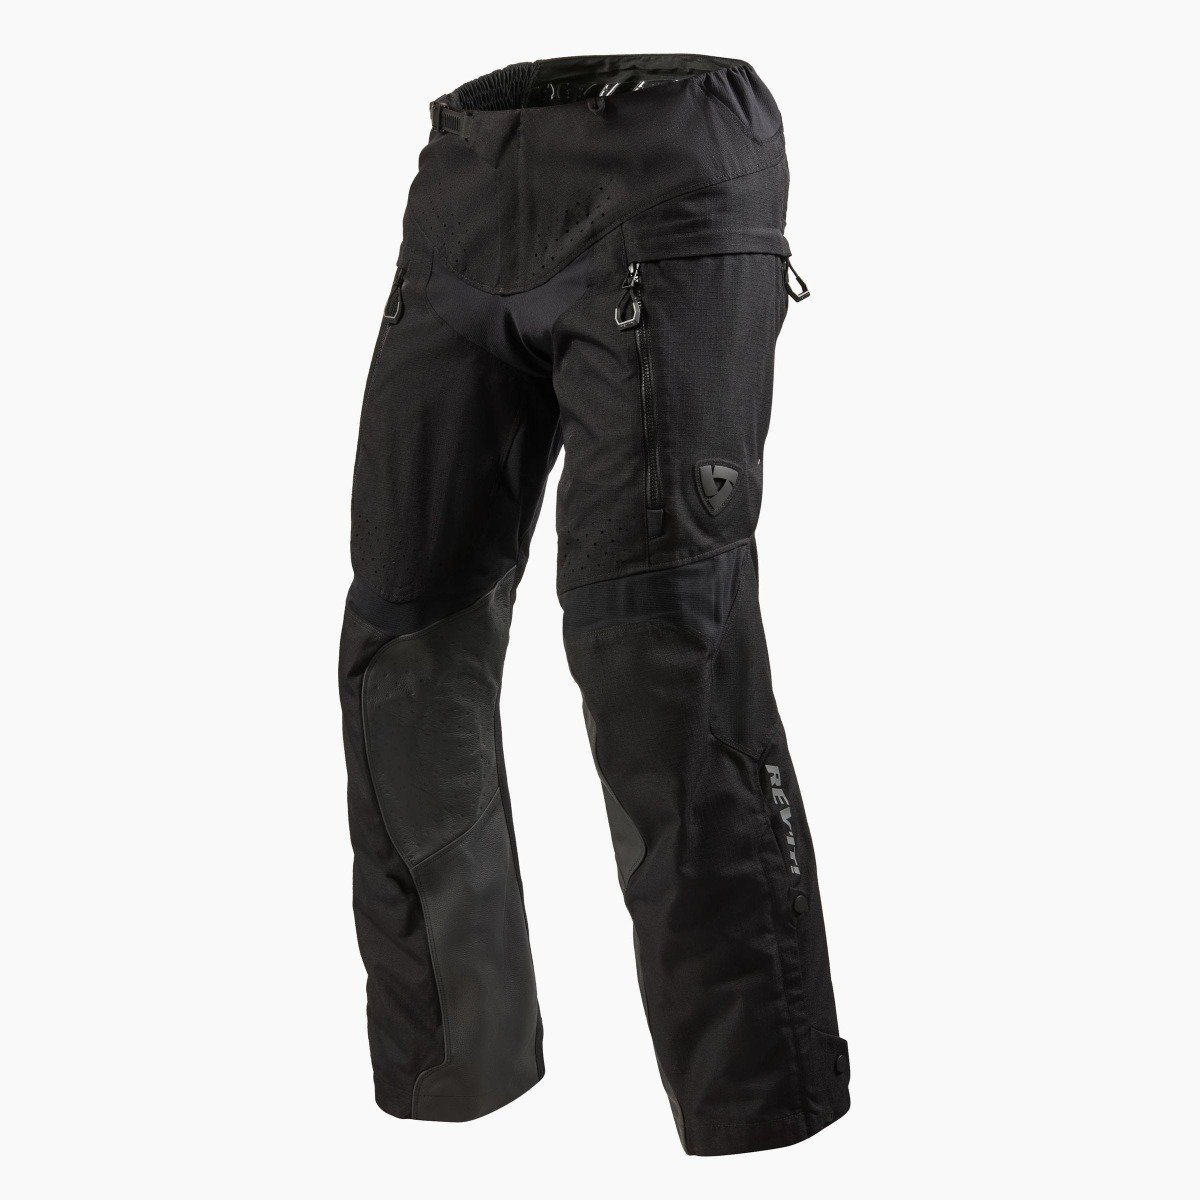 Image of REV'IT! Continent Black Motorcycle Pants Talla S